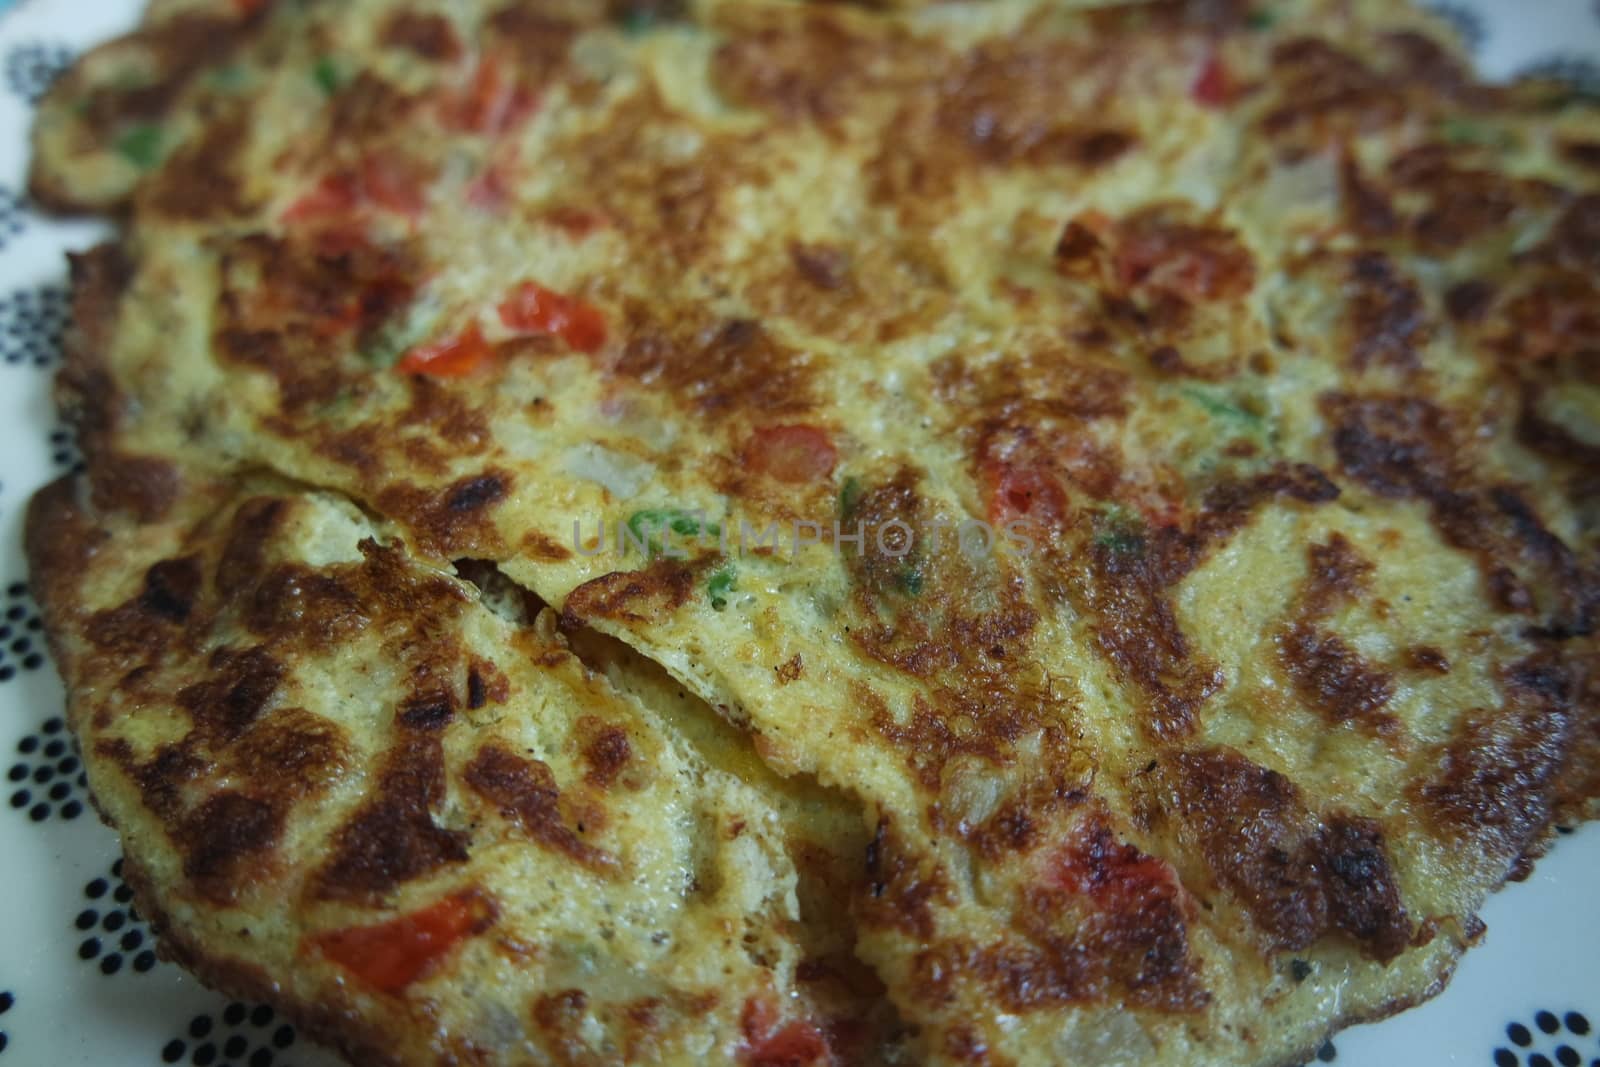 Close-up viewof egg omelet with peppers and spices sprinkled by Photochowk